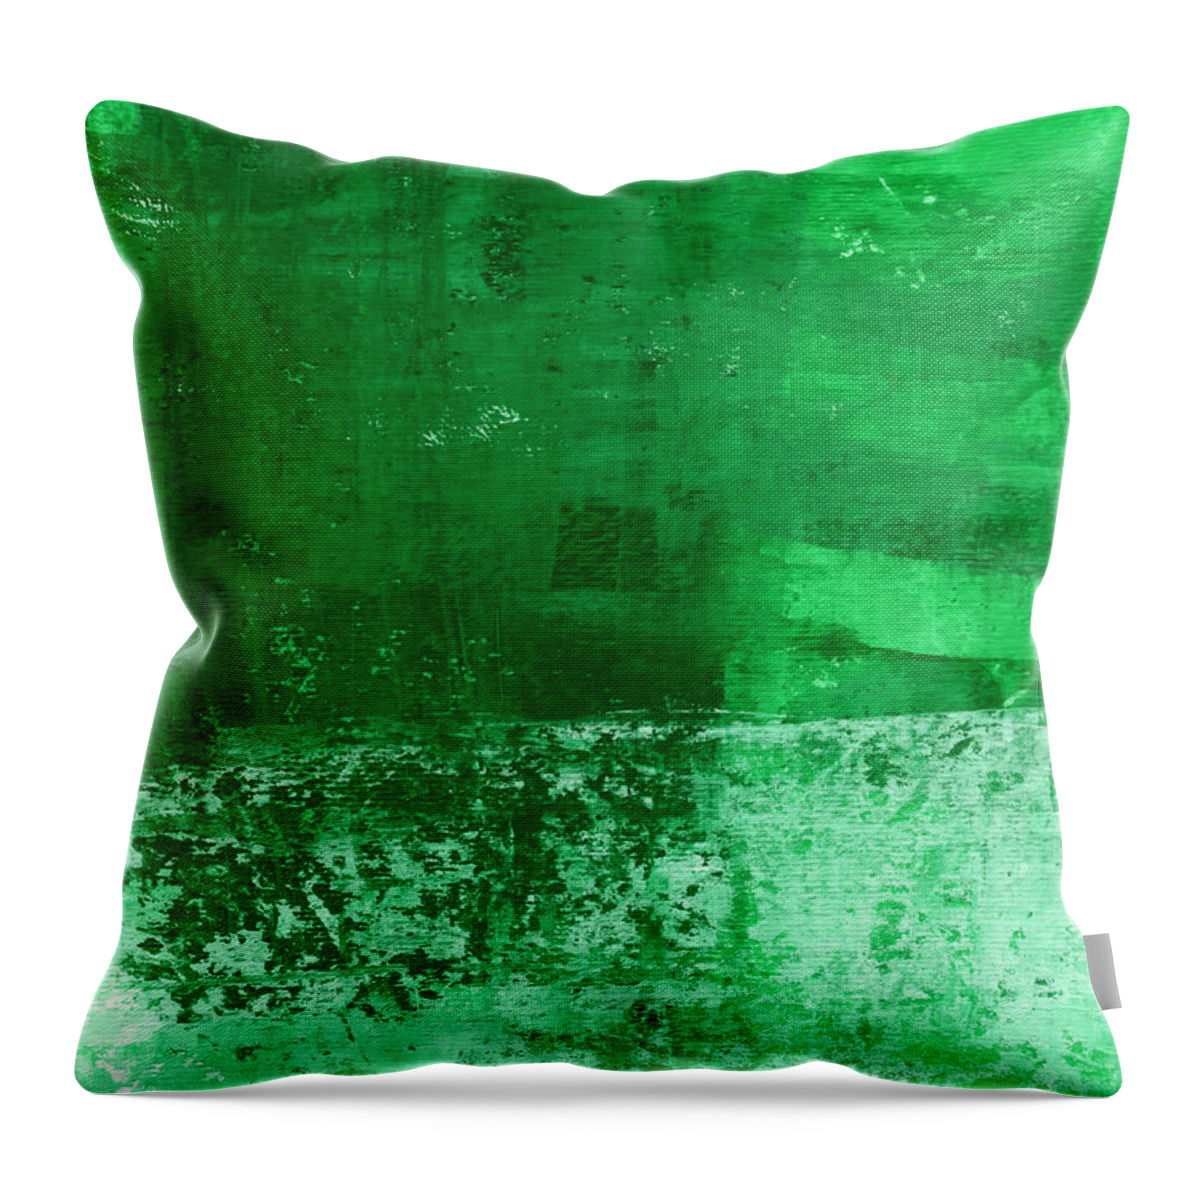 Green Abstract Throw Pillow featuring the painting Verde- Contemporary Abstract Art by Linda Woods